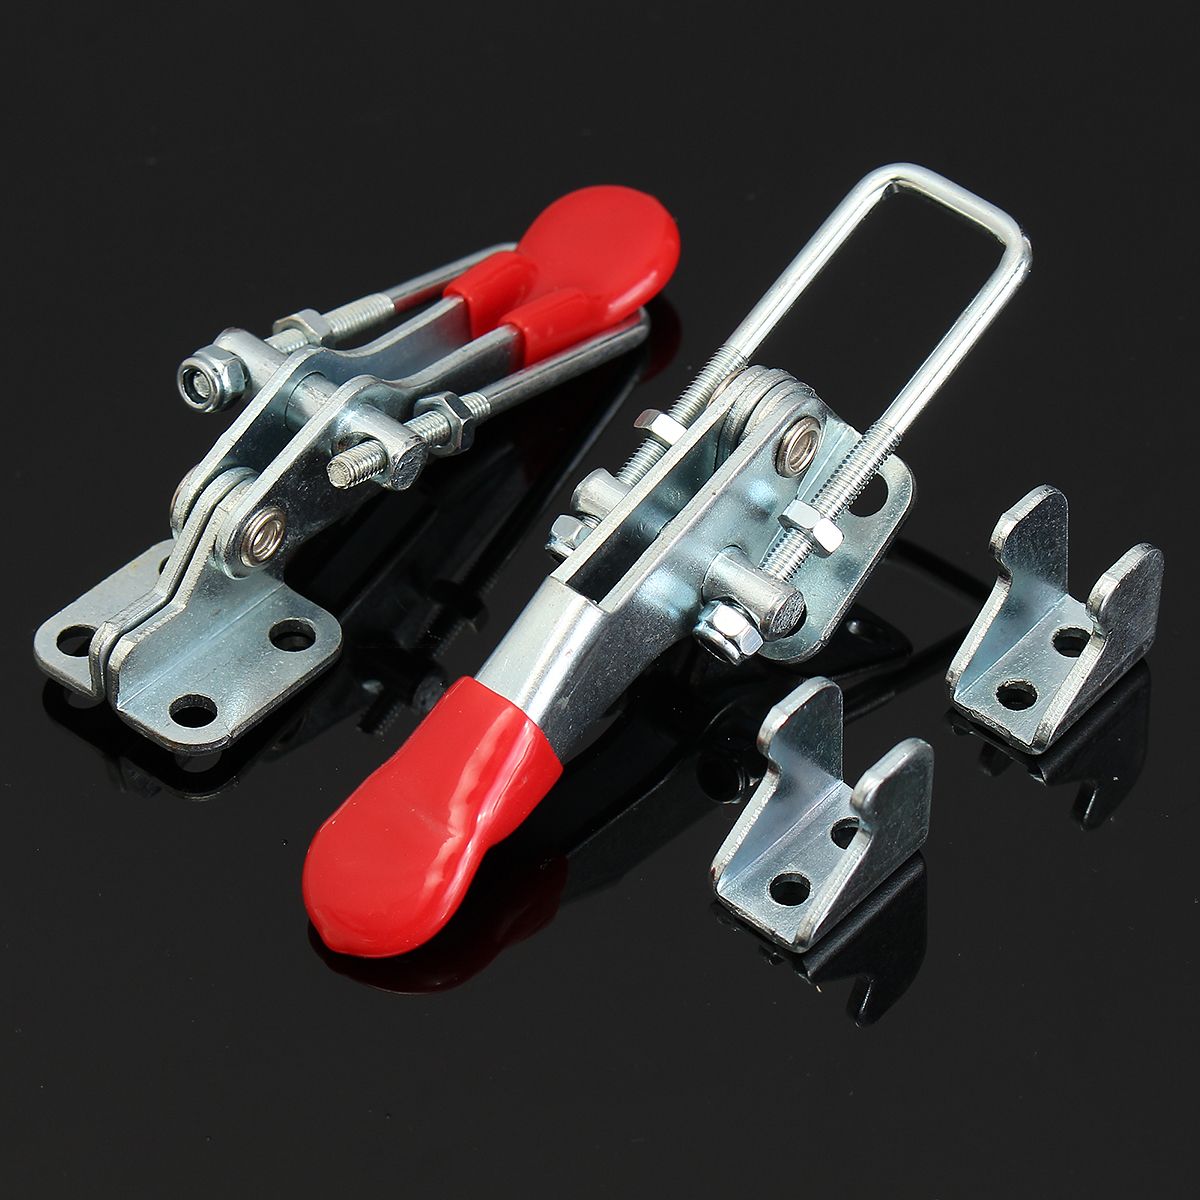 2Pcs-Spring-Loaded-Toggle-Galvanized-Iron-Latch-Catches-Hasp-for-Case-Box-Chest-Trunk-1122427